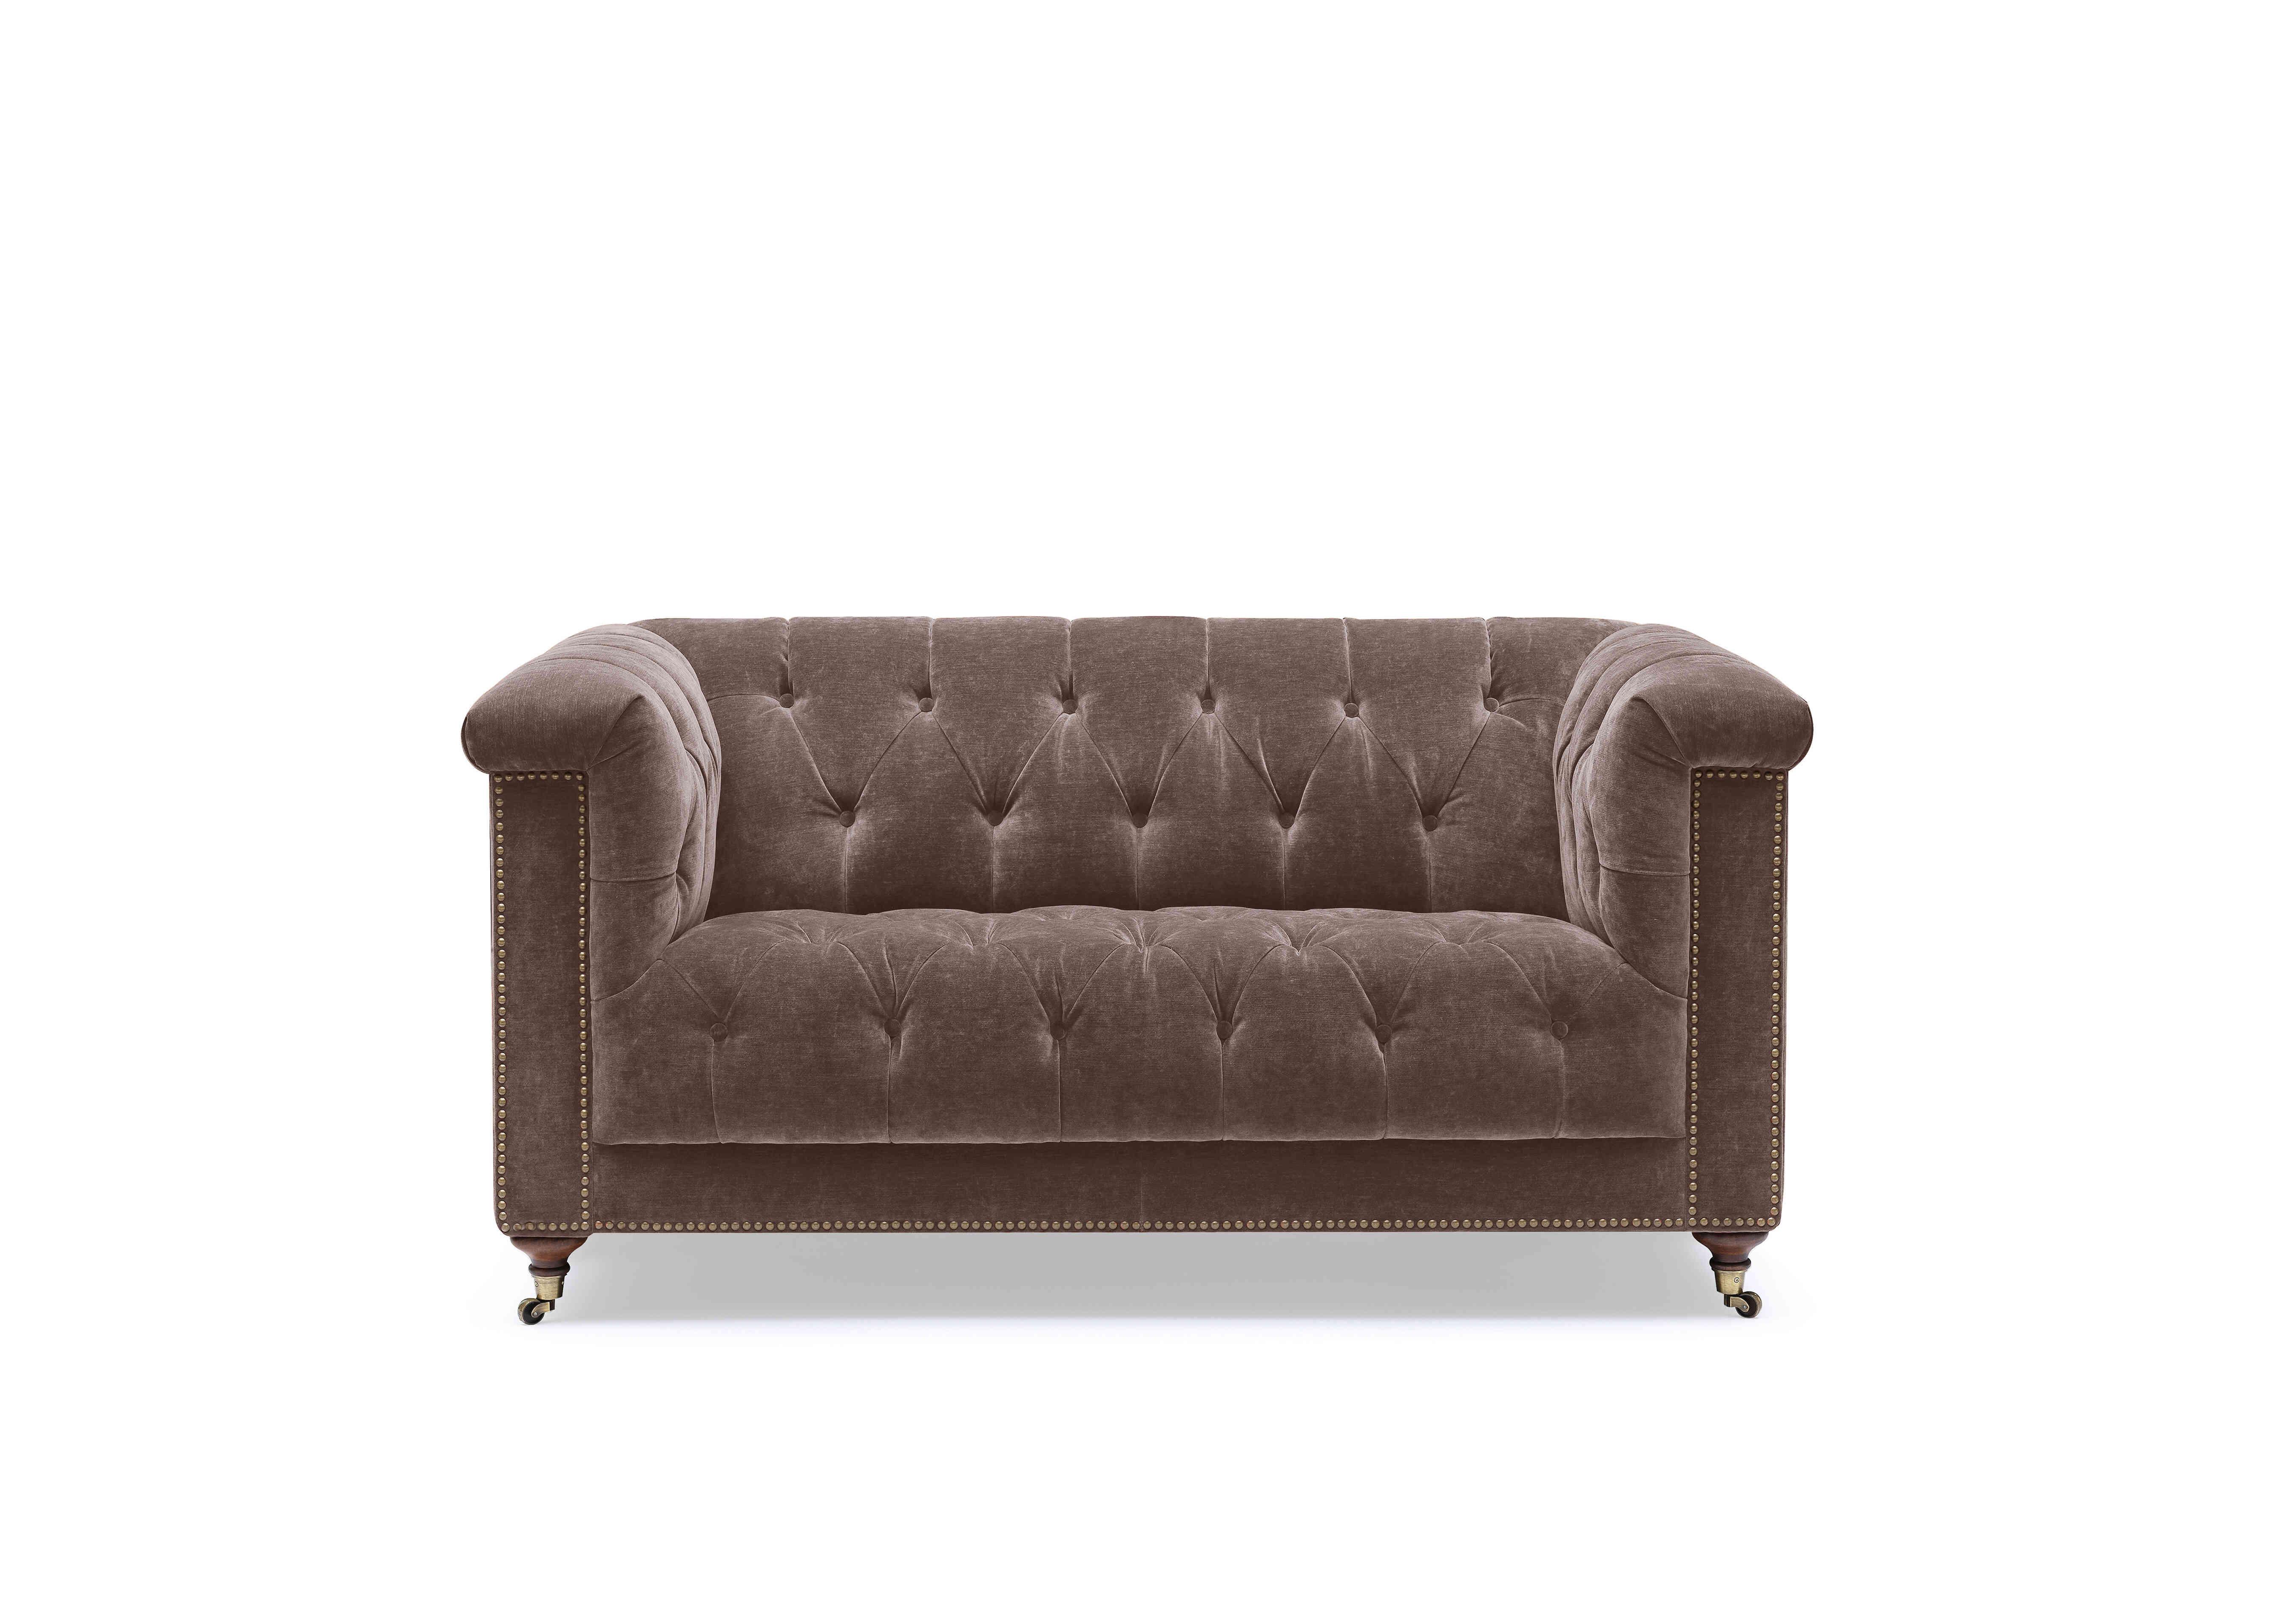 Wallace 2 Seater Fabric Chesterfield Sofa in X3y1-W023 Antler on Furniture Village